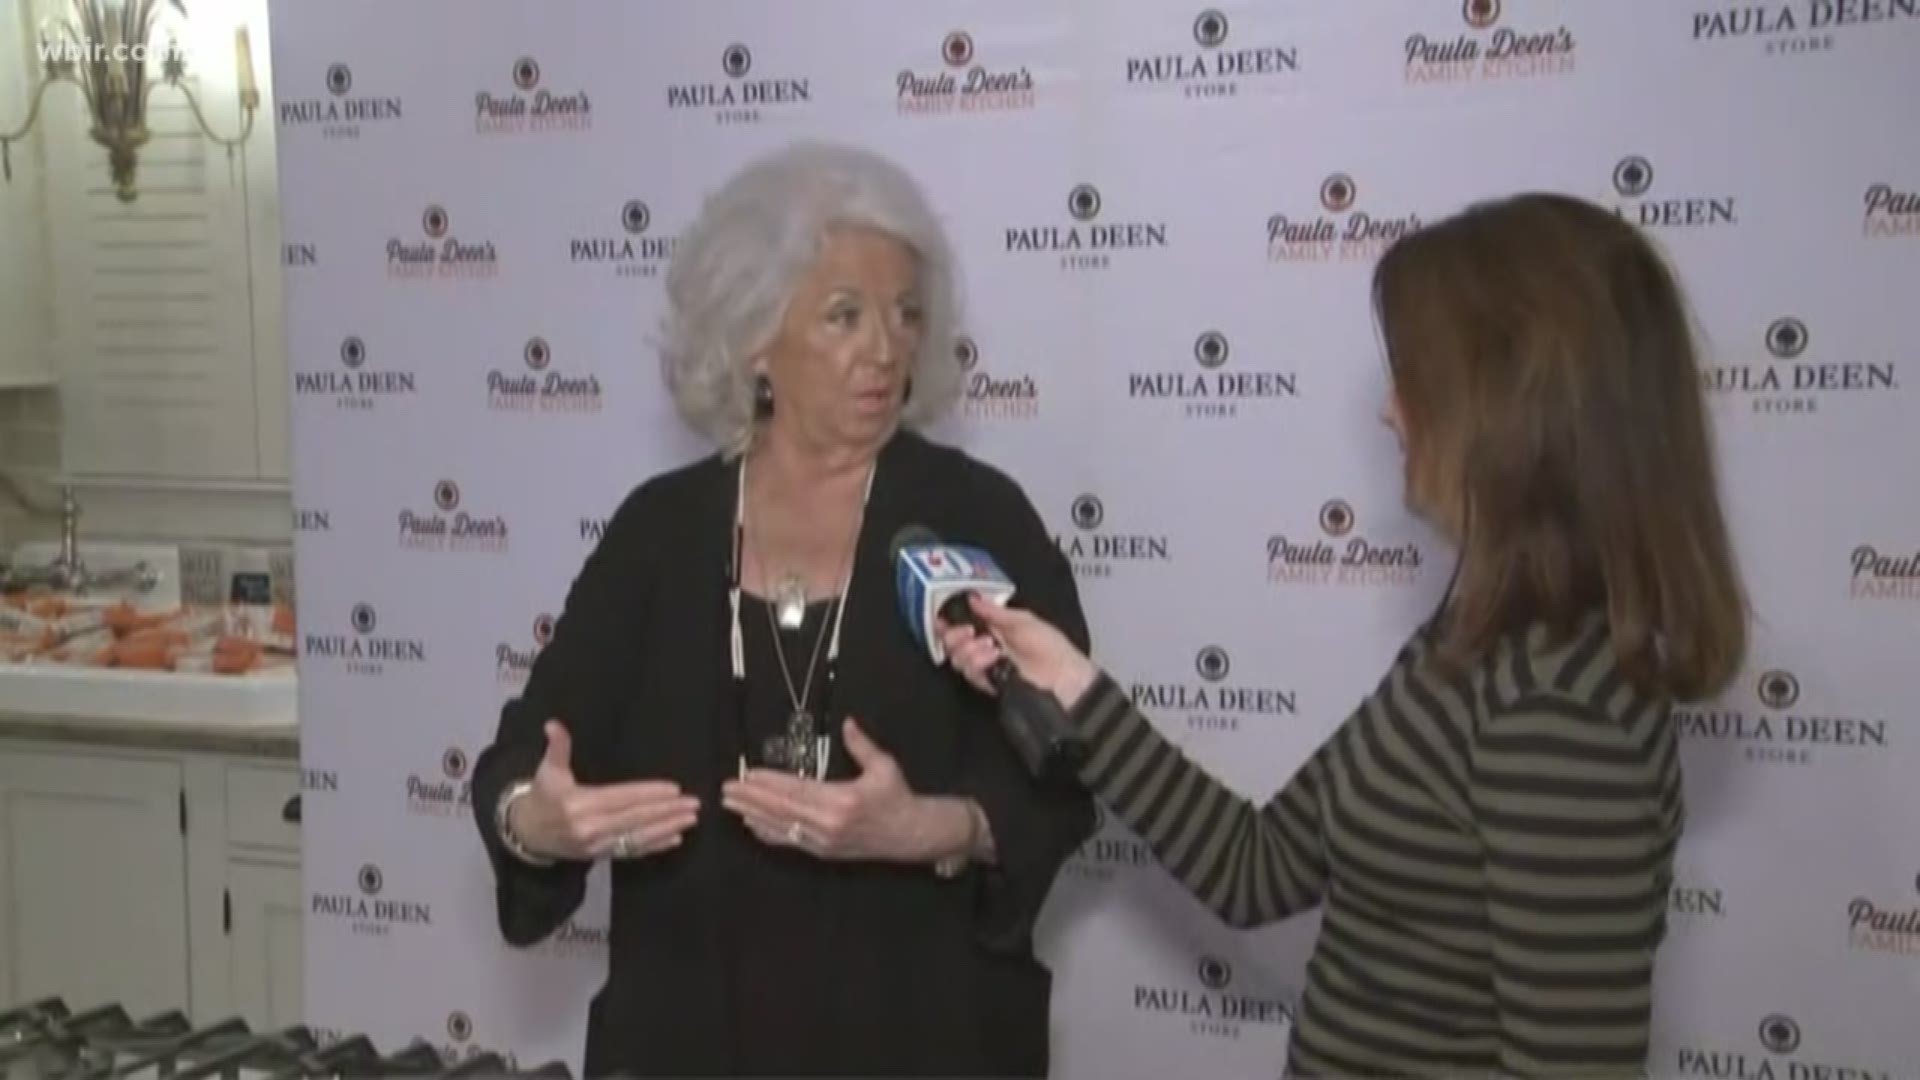 Celebrity Chef Paula Deen signs copies of her new book at her restaurant at The Island in Pigeon Forge. Jan 15, 2019-4pm